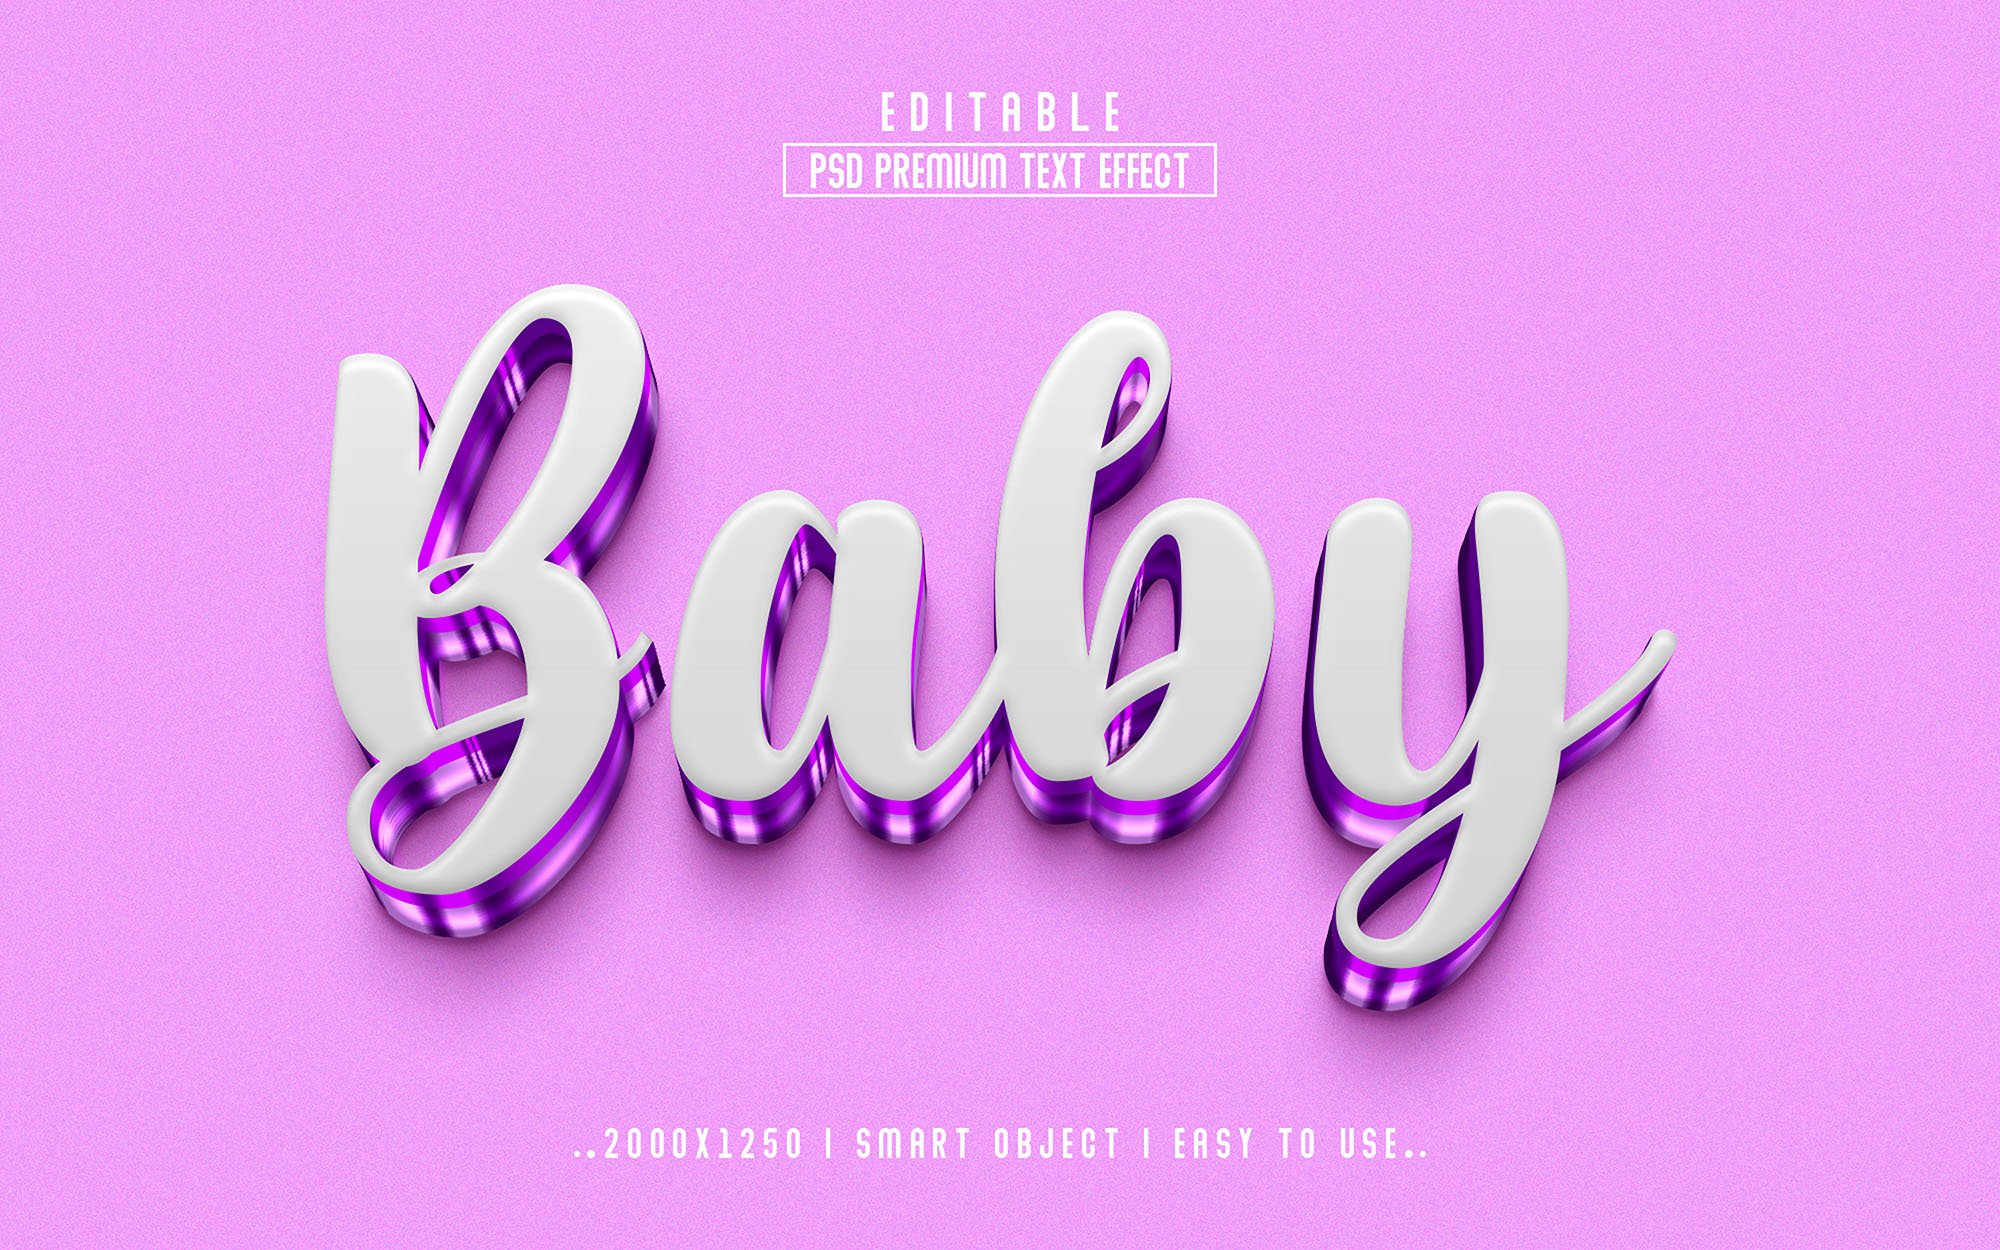 3d rendering of the word baby on a pink background.